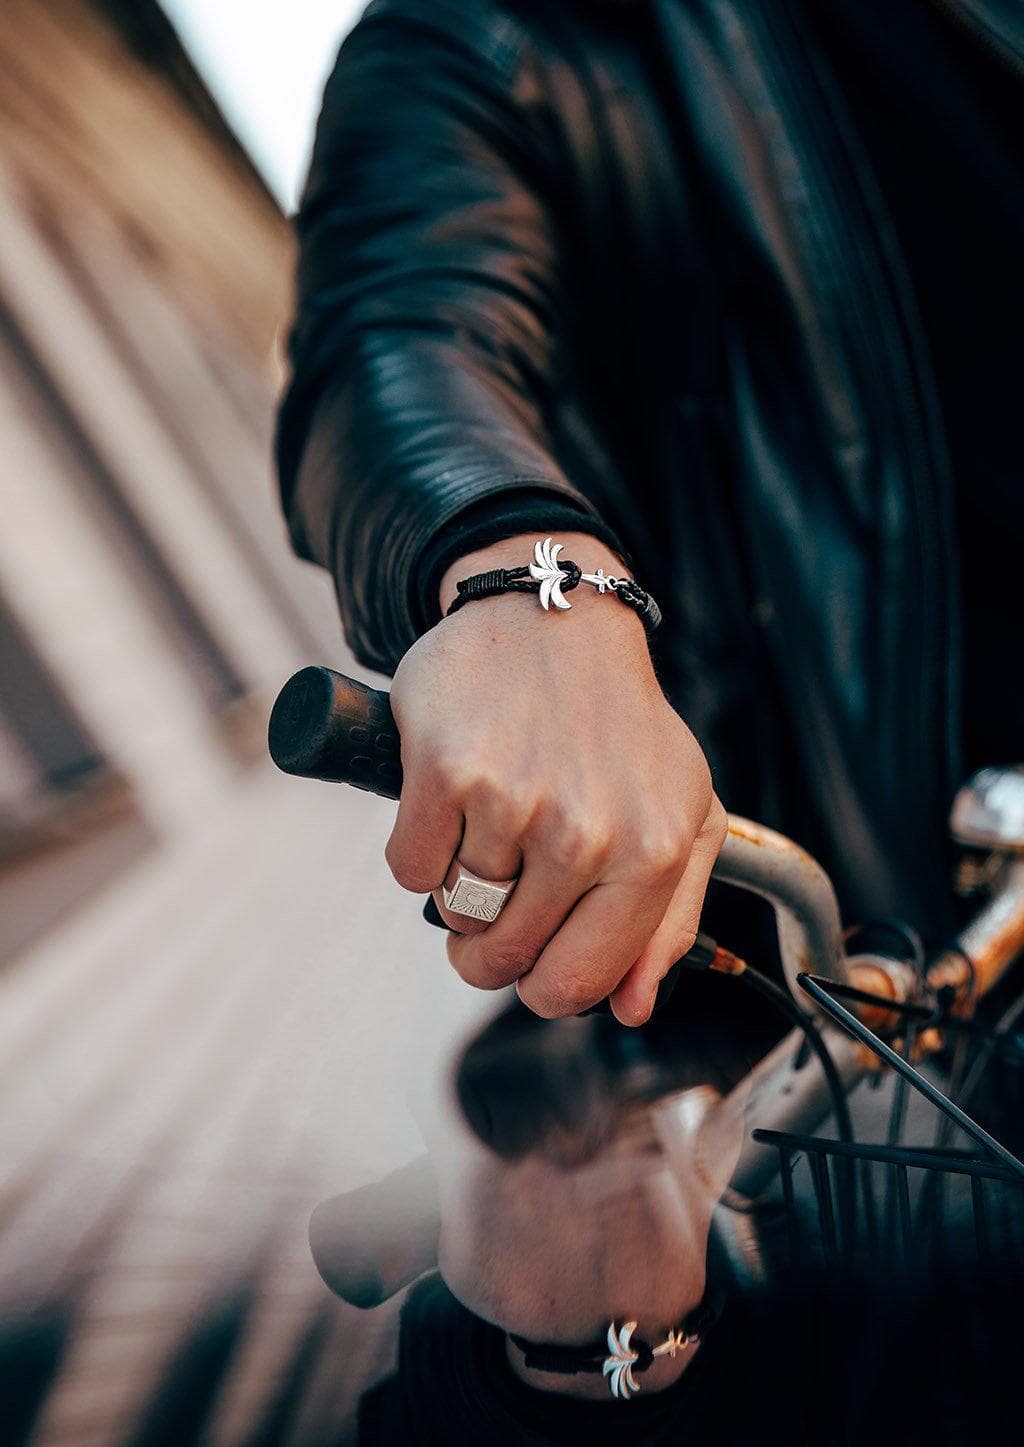 Starlight - Season two Palm anchor bracelet with black leather. On male model riding a motorcycle.